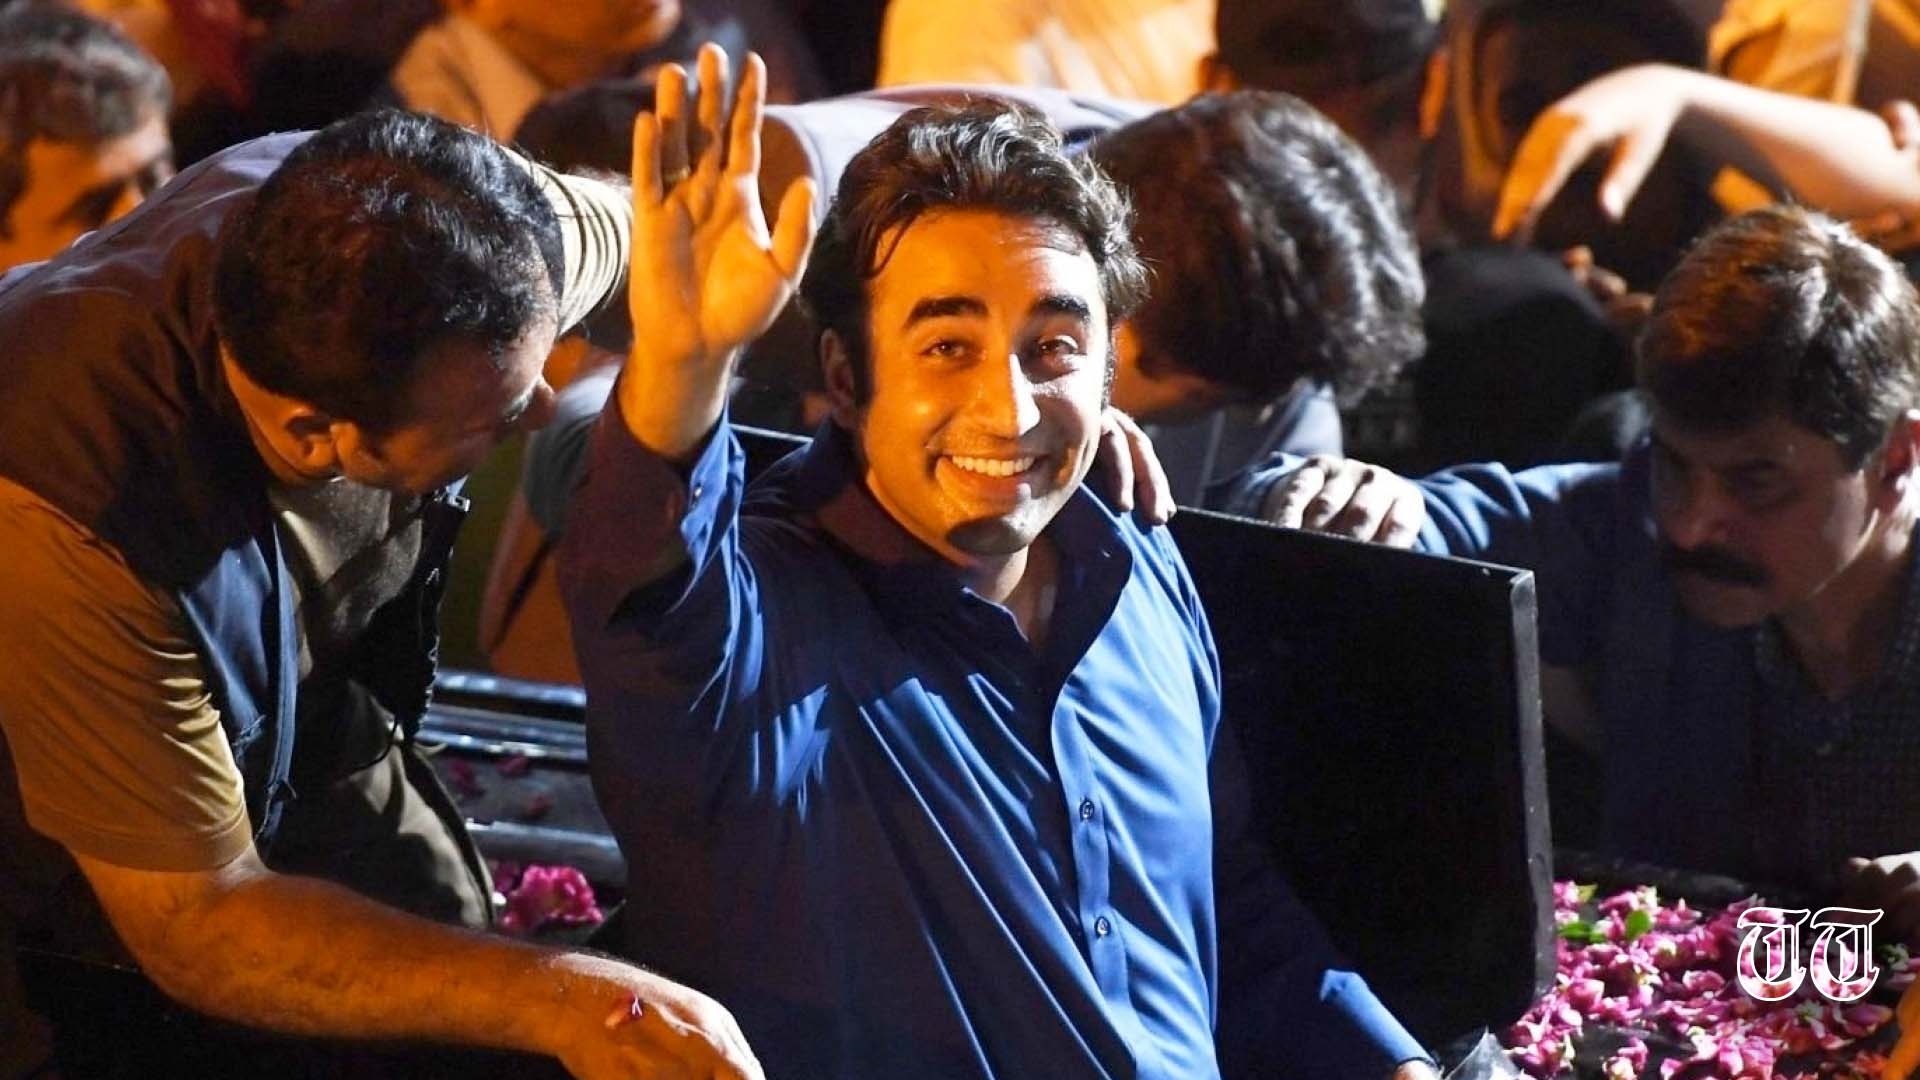 A file photo is shown of foreign minister Bilawal Bhutto-Zardari in Karachi.